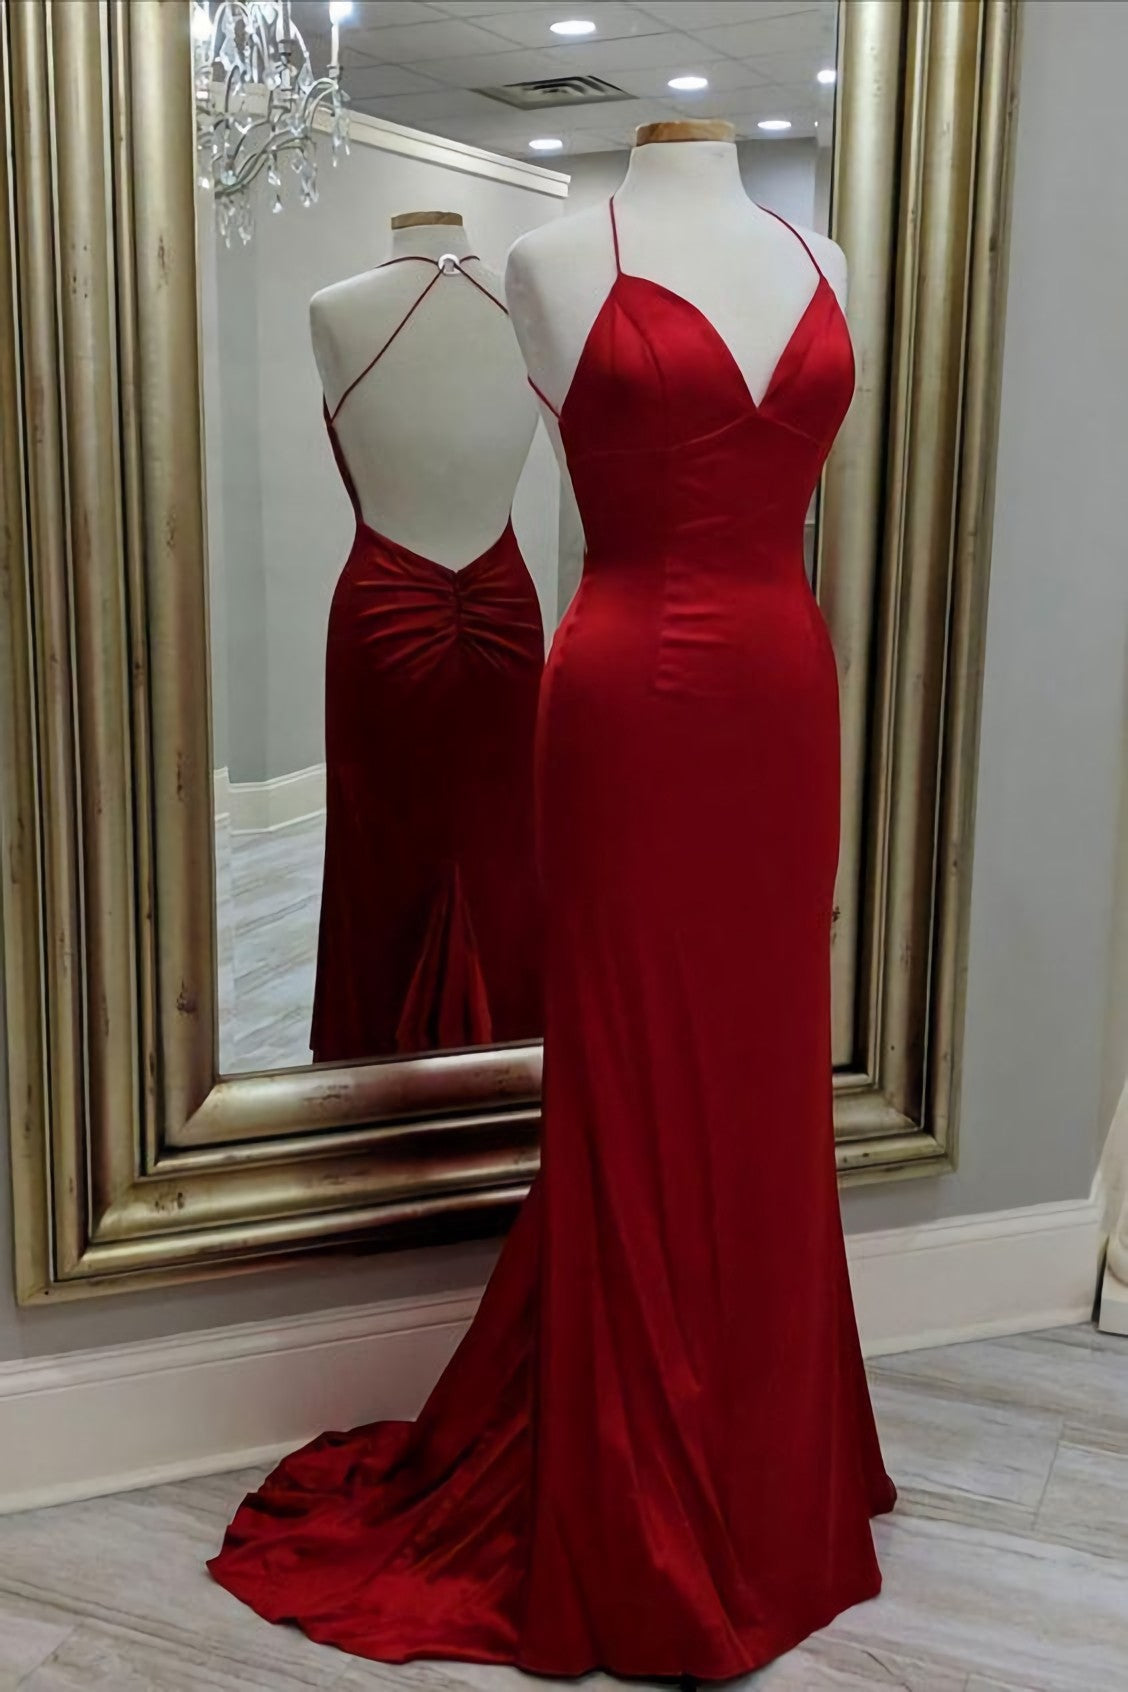 Mermaid Red Long Evening Dress, Formal Dress, With Open Back Prom Dress